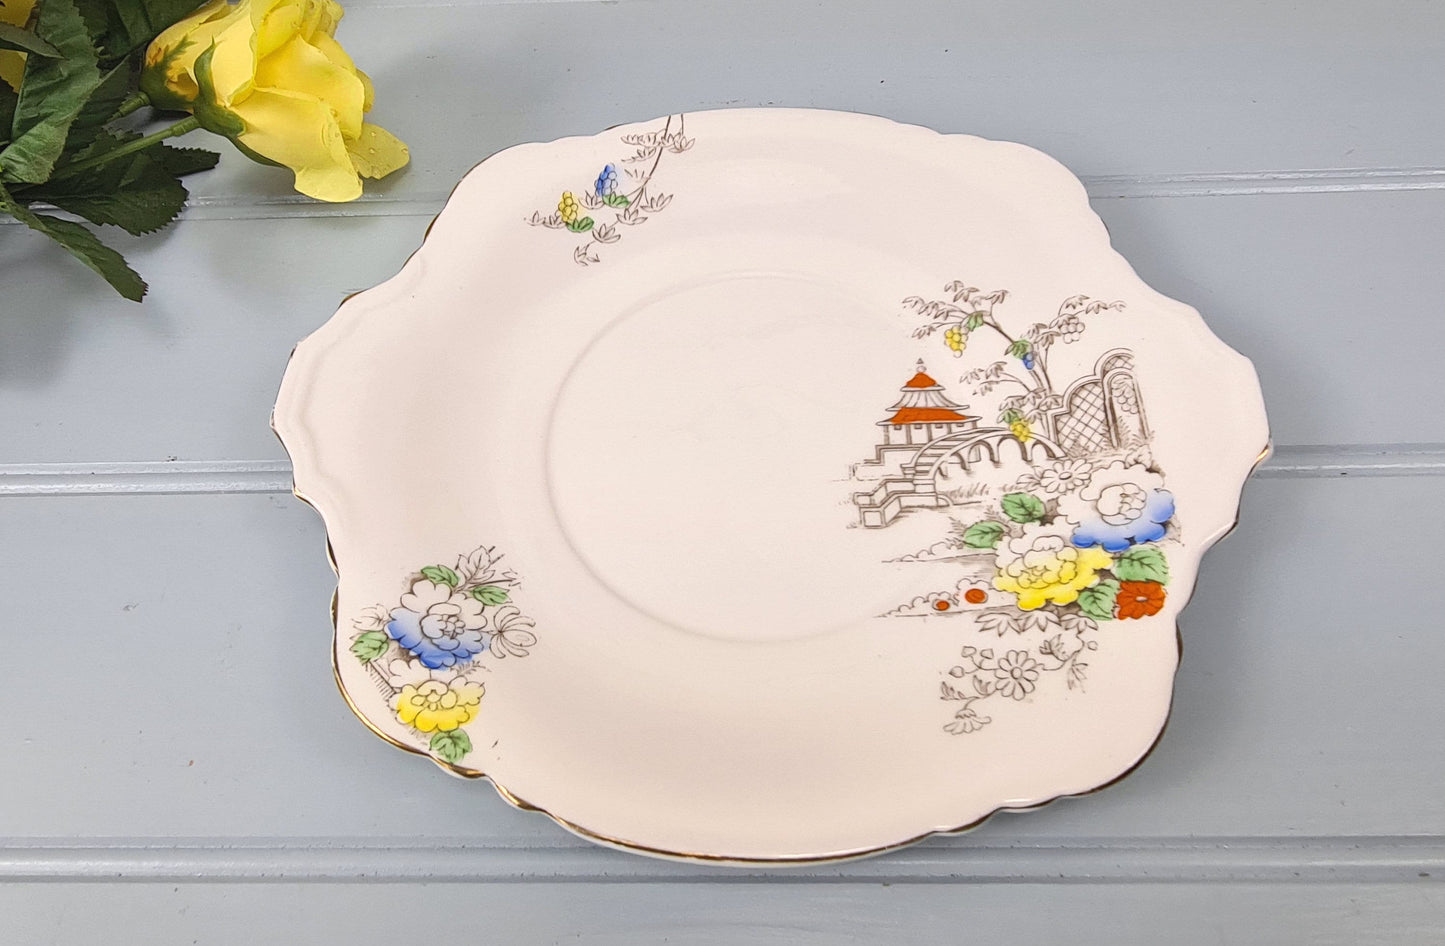 Vintage 1930s art deco Heathcote China tea plate sandwich platter cake tray biscuit plate Bone china Immaculate condition Ideal gift